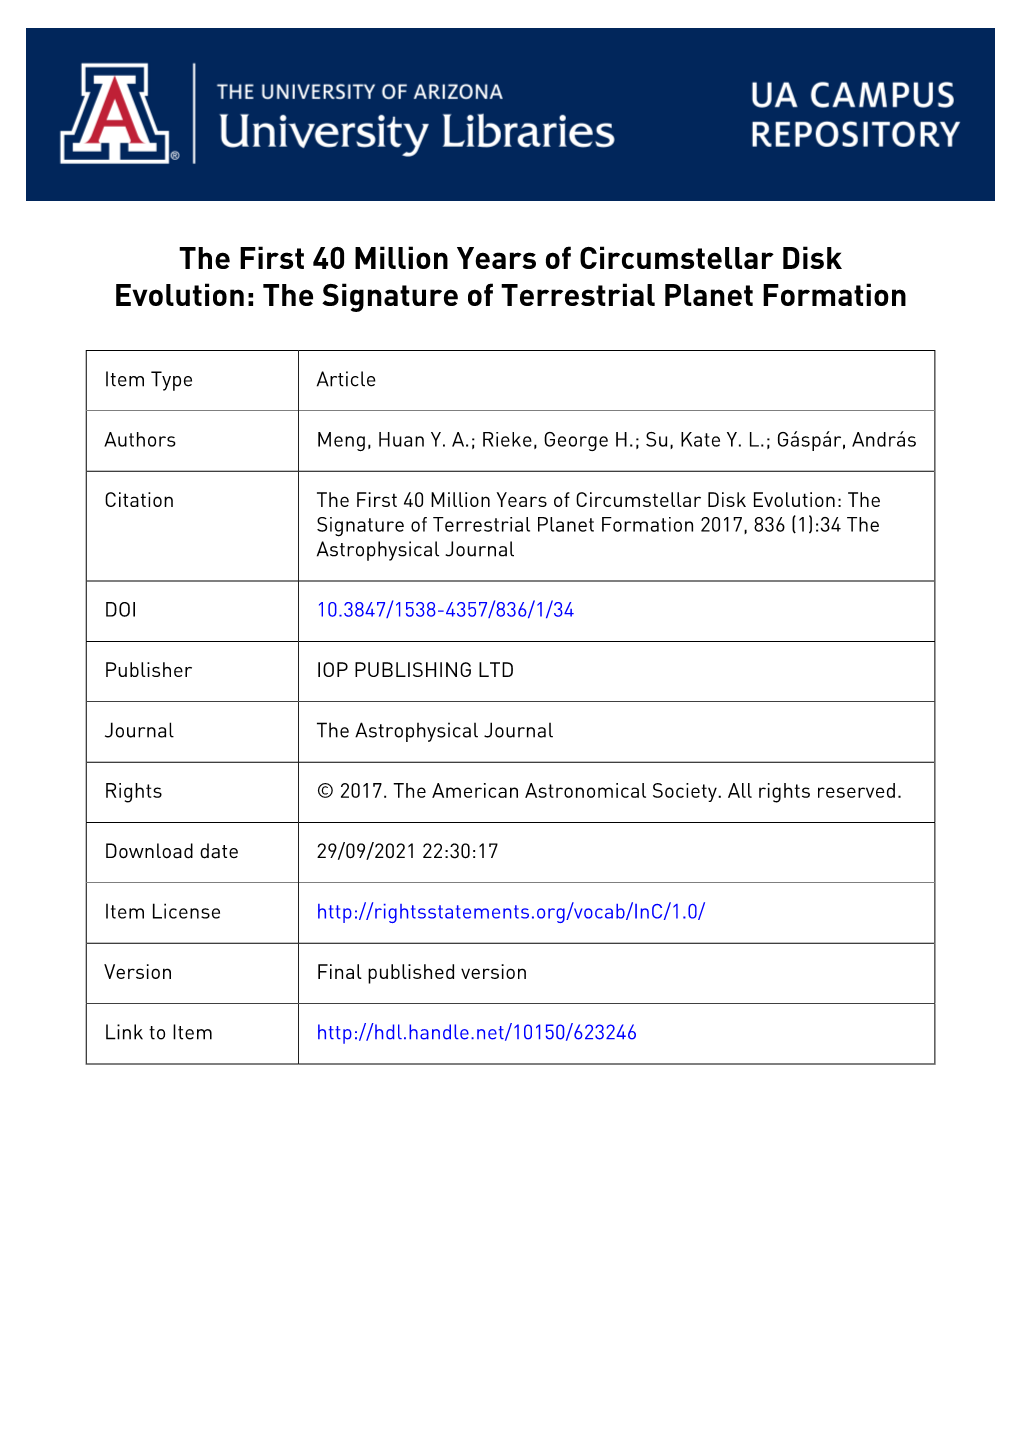 The First 40 Million Years of Circumstellar Disk Evolution: the Signature of Terrestrial Planet Formation